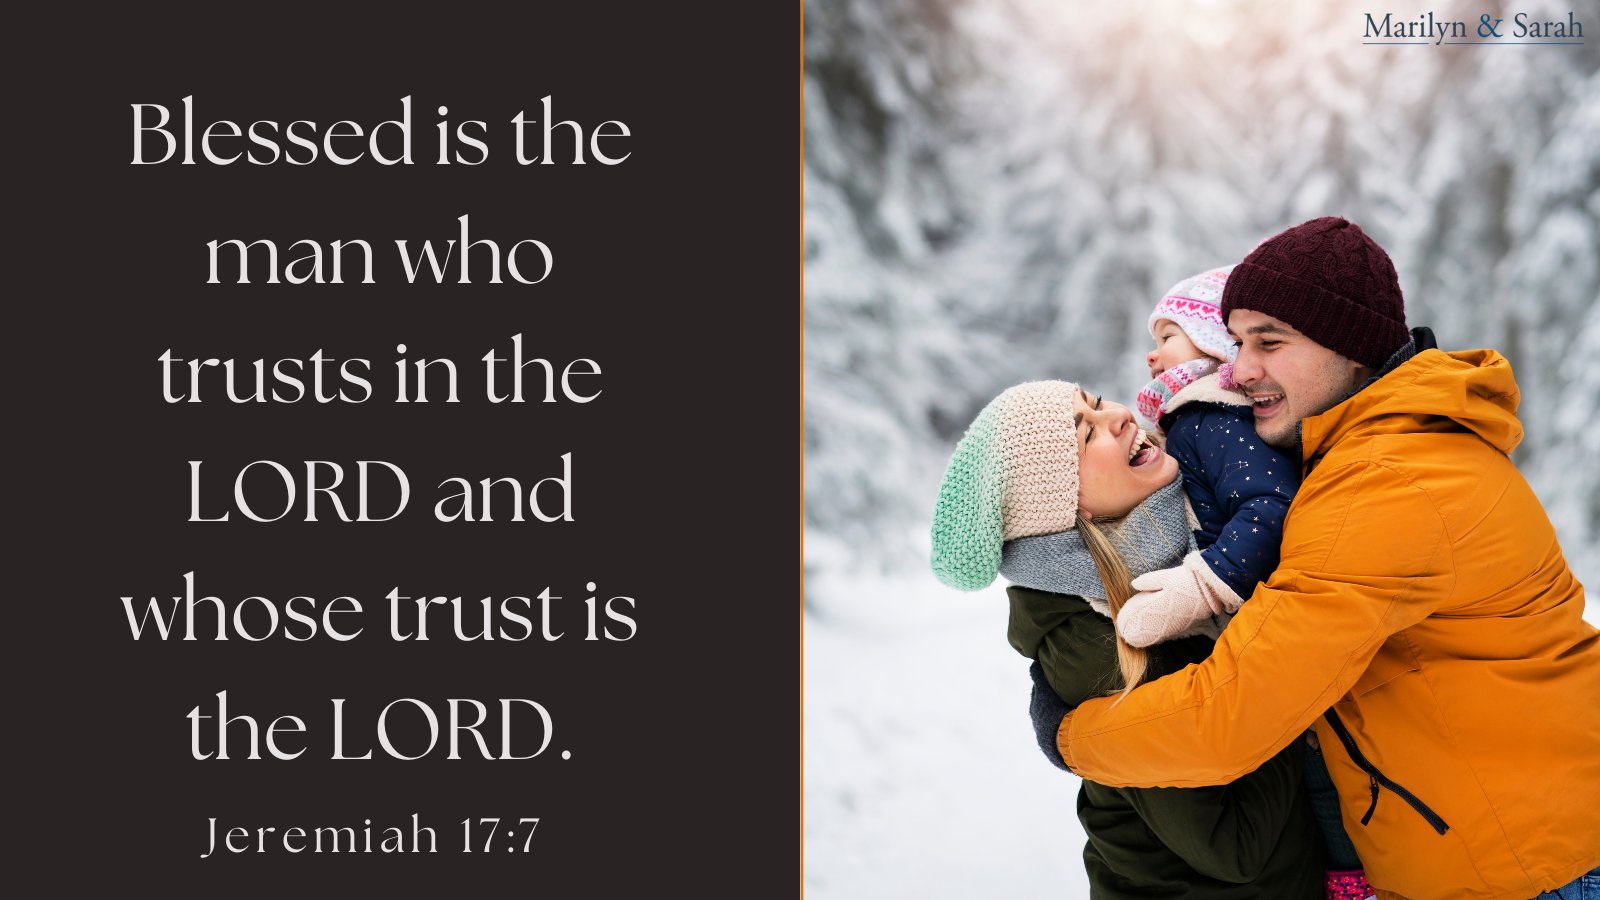 Marilyn & Sarah Blessed is the manwho trusts in the LORD and whose trust is the LORD Jeremiah 17:7